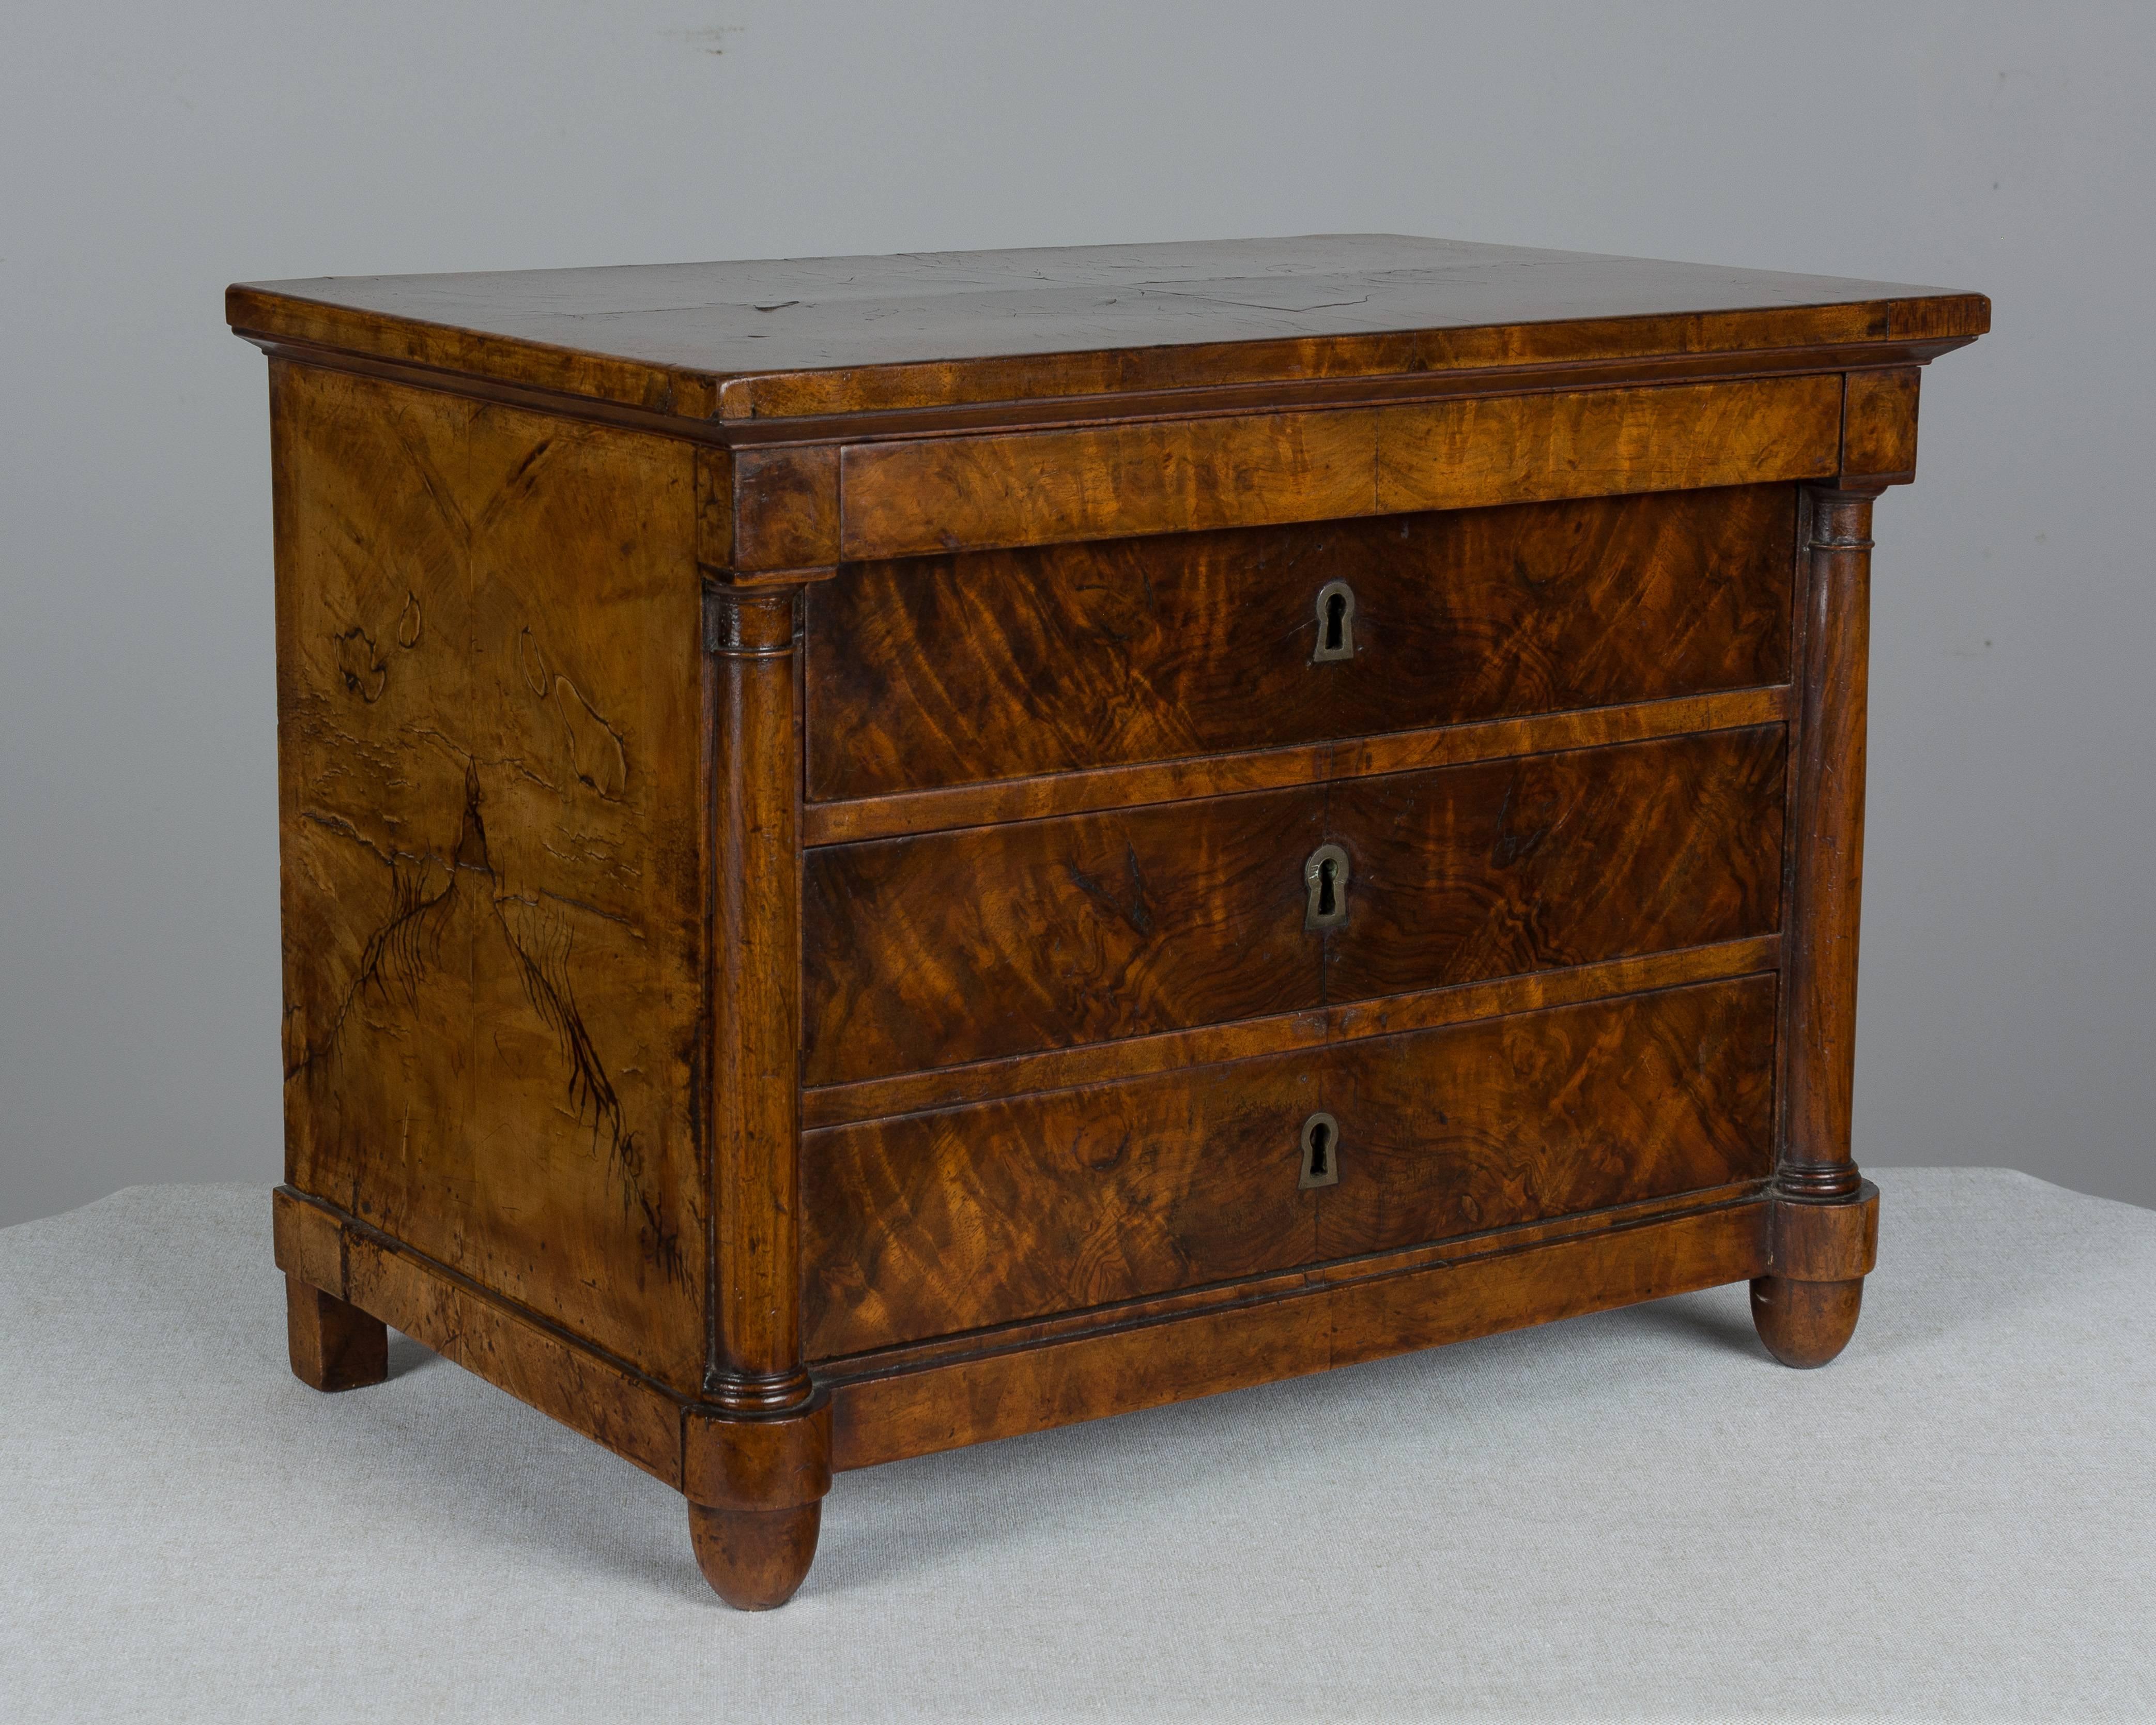 A fine early 19th century French Empire miniature sample commode with four dovetailed drawers. Made of burl of walnut veneer with oak and pine as secondary woods. Working locks with one key. French polish finish. Excellent quality. Perfect for